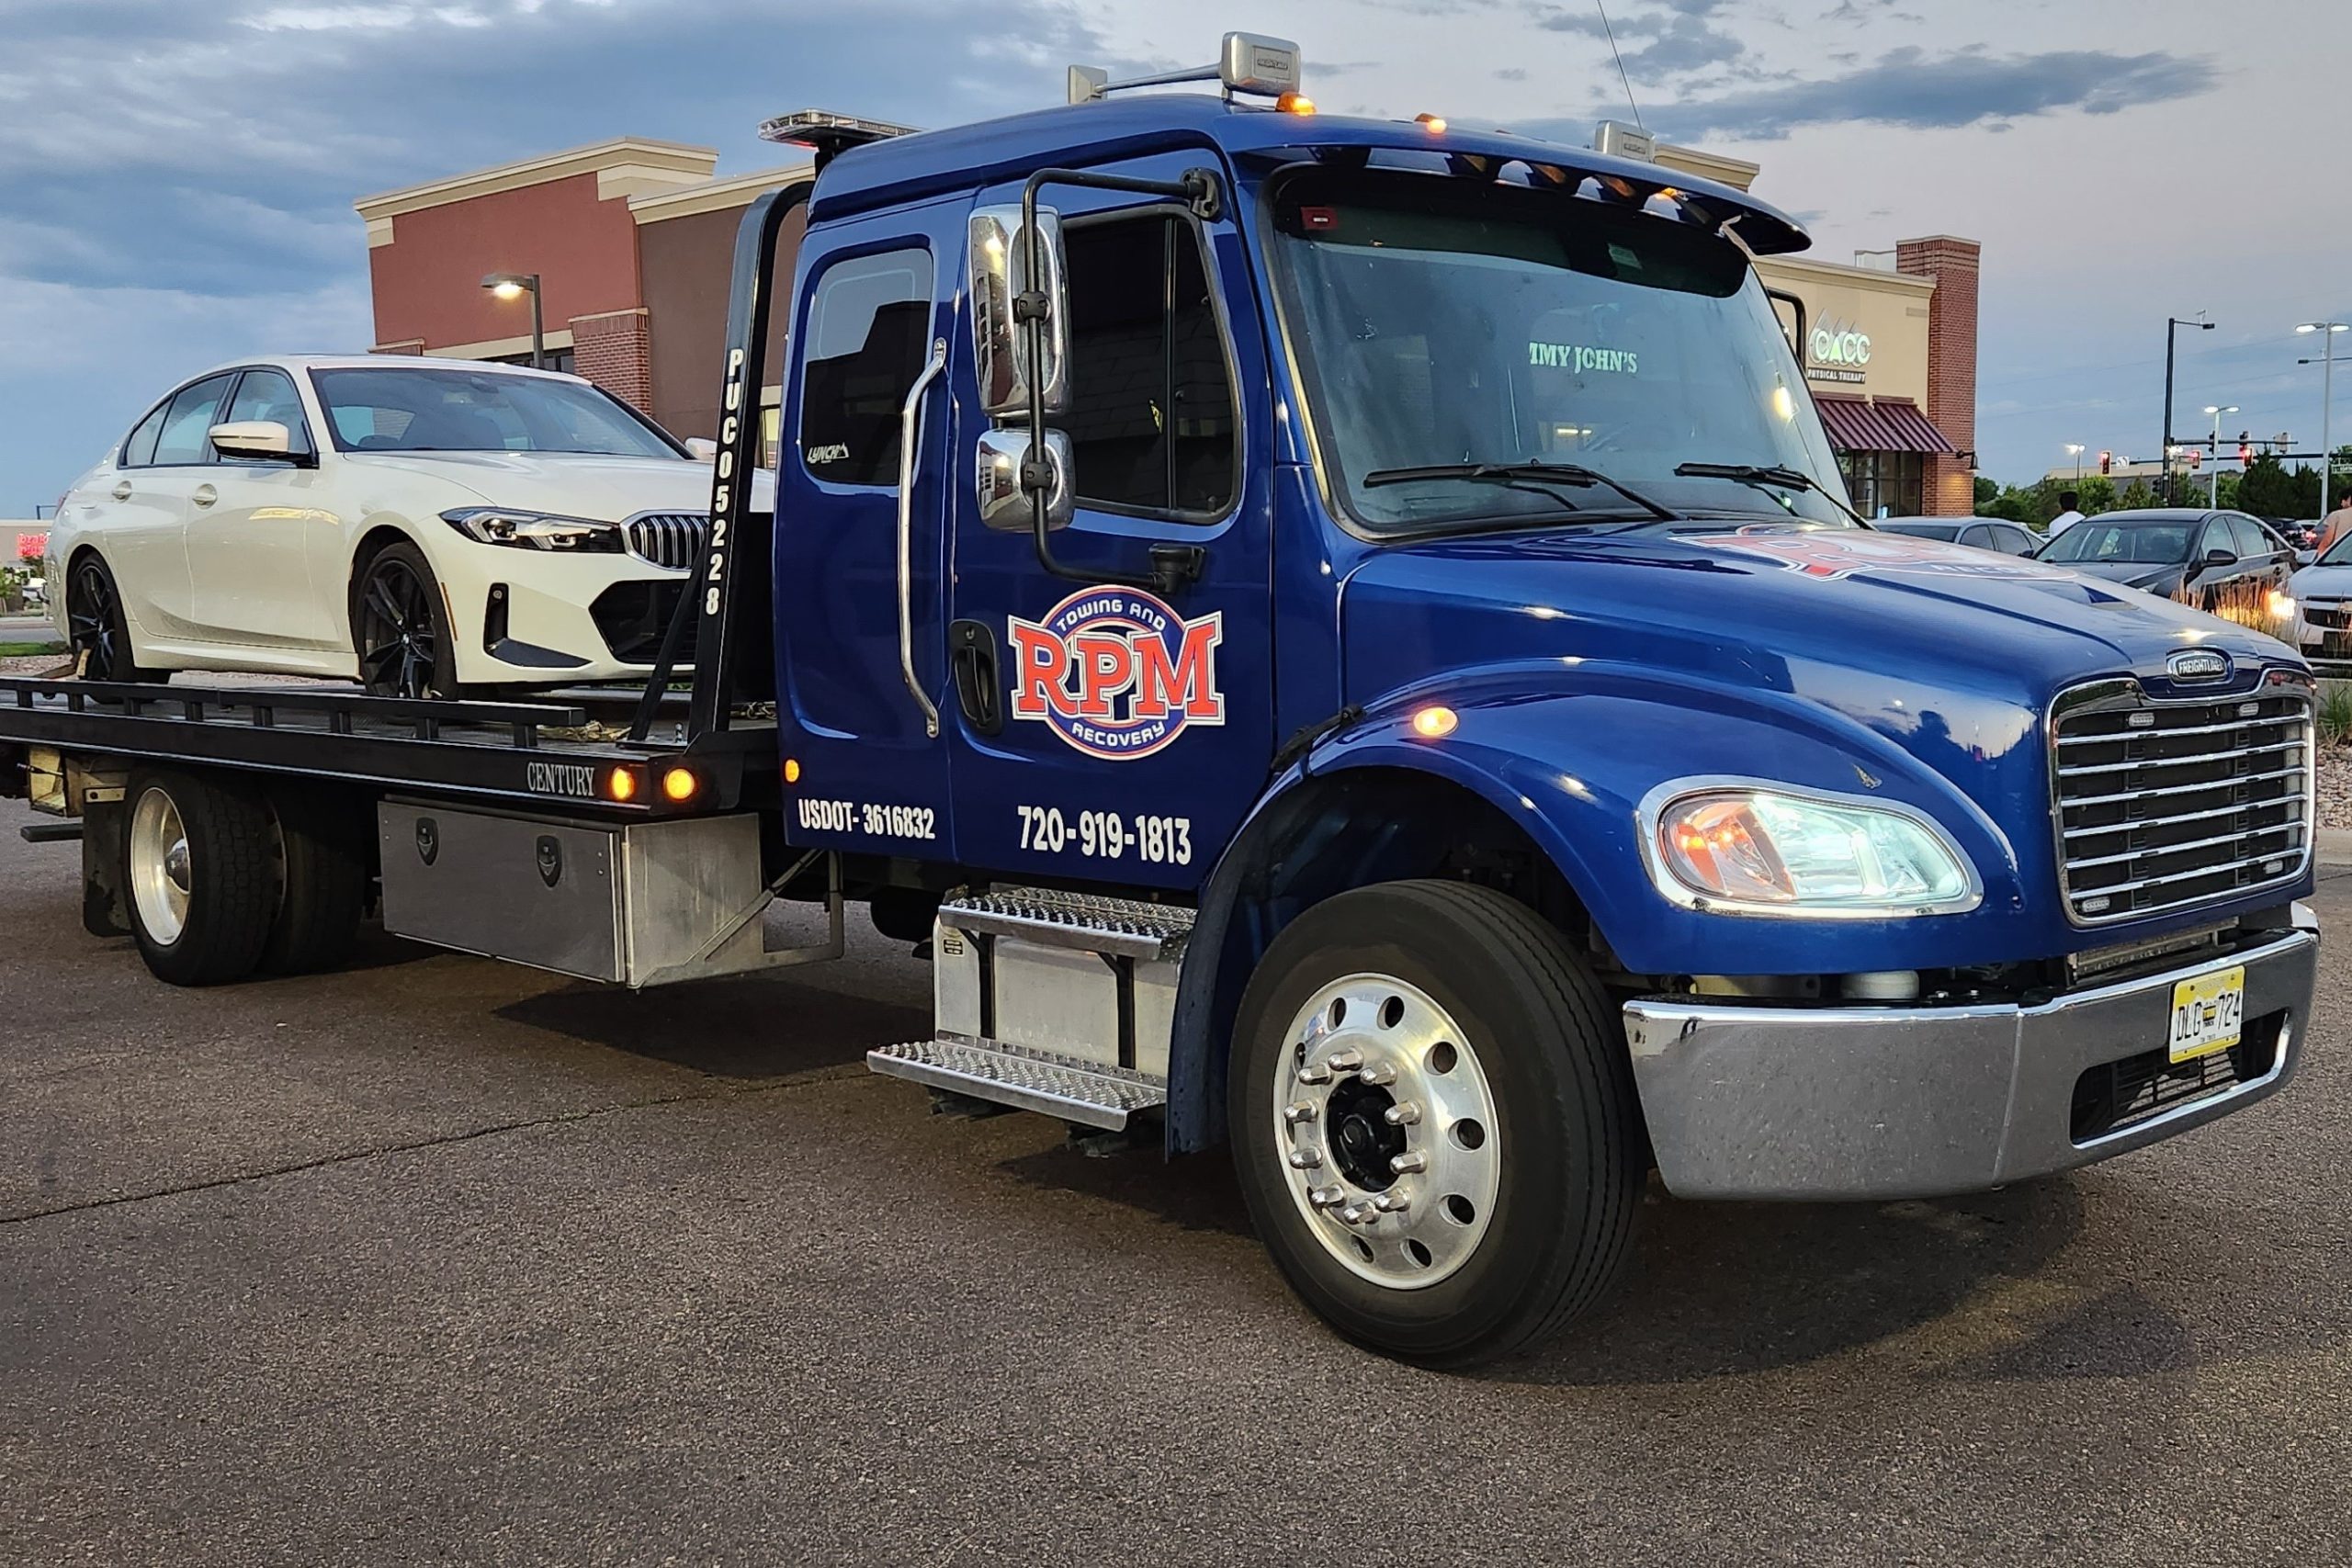 this image shows towing service in Parker, CO